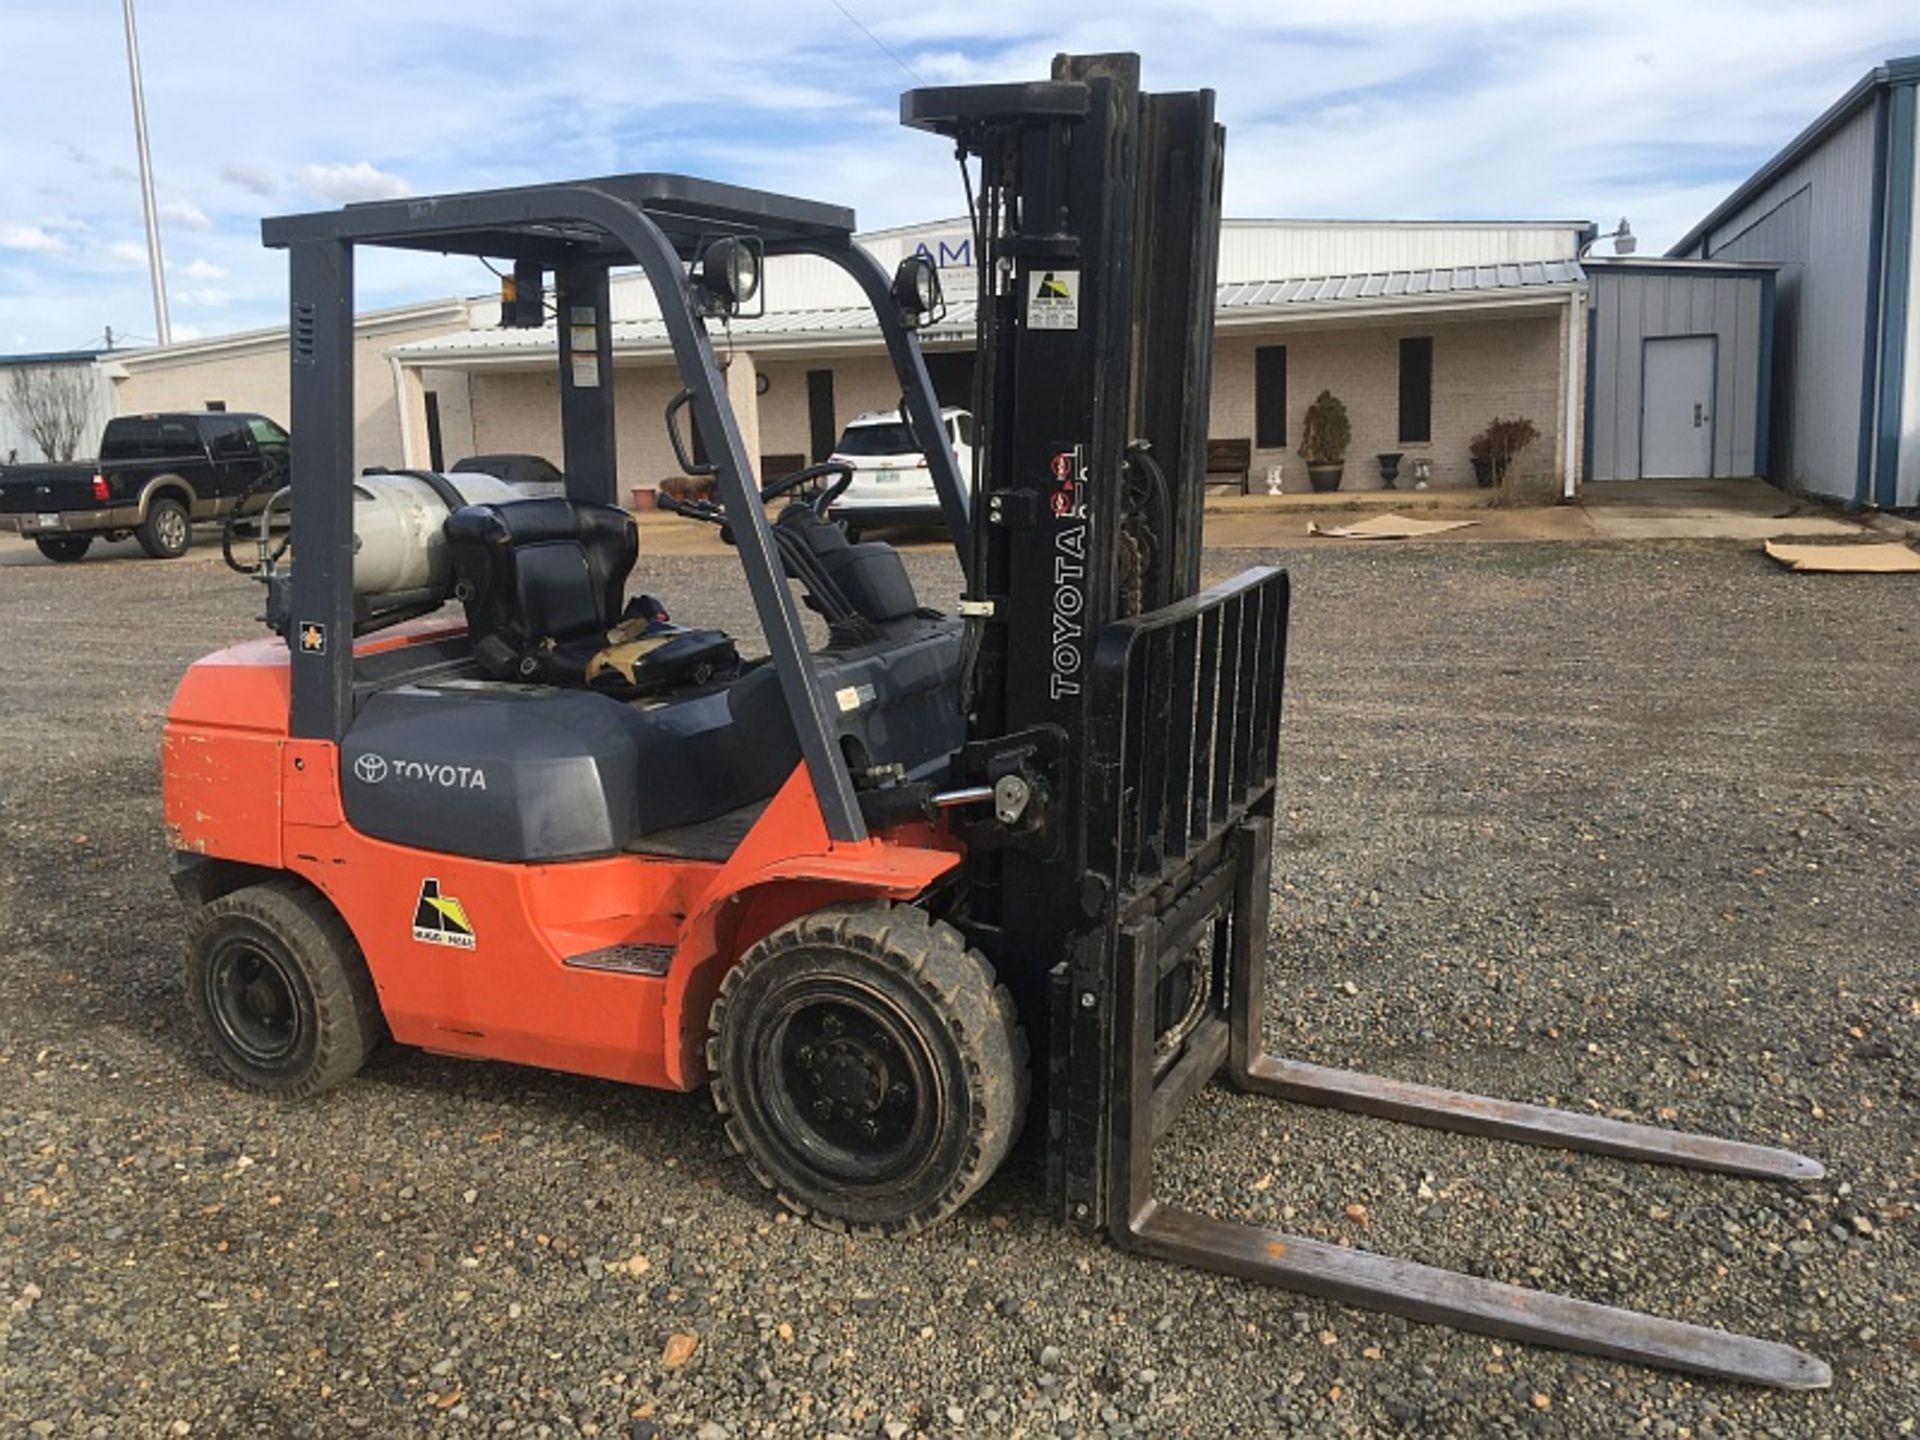 Toyota Forklift, Mdl 7FGU30, 5,500 lb. cap., LP Gas, Side Shift, All-Terrain Tires, 3-stage Mast, SN - Image 2 of 3